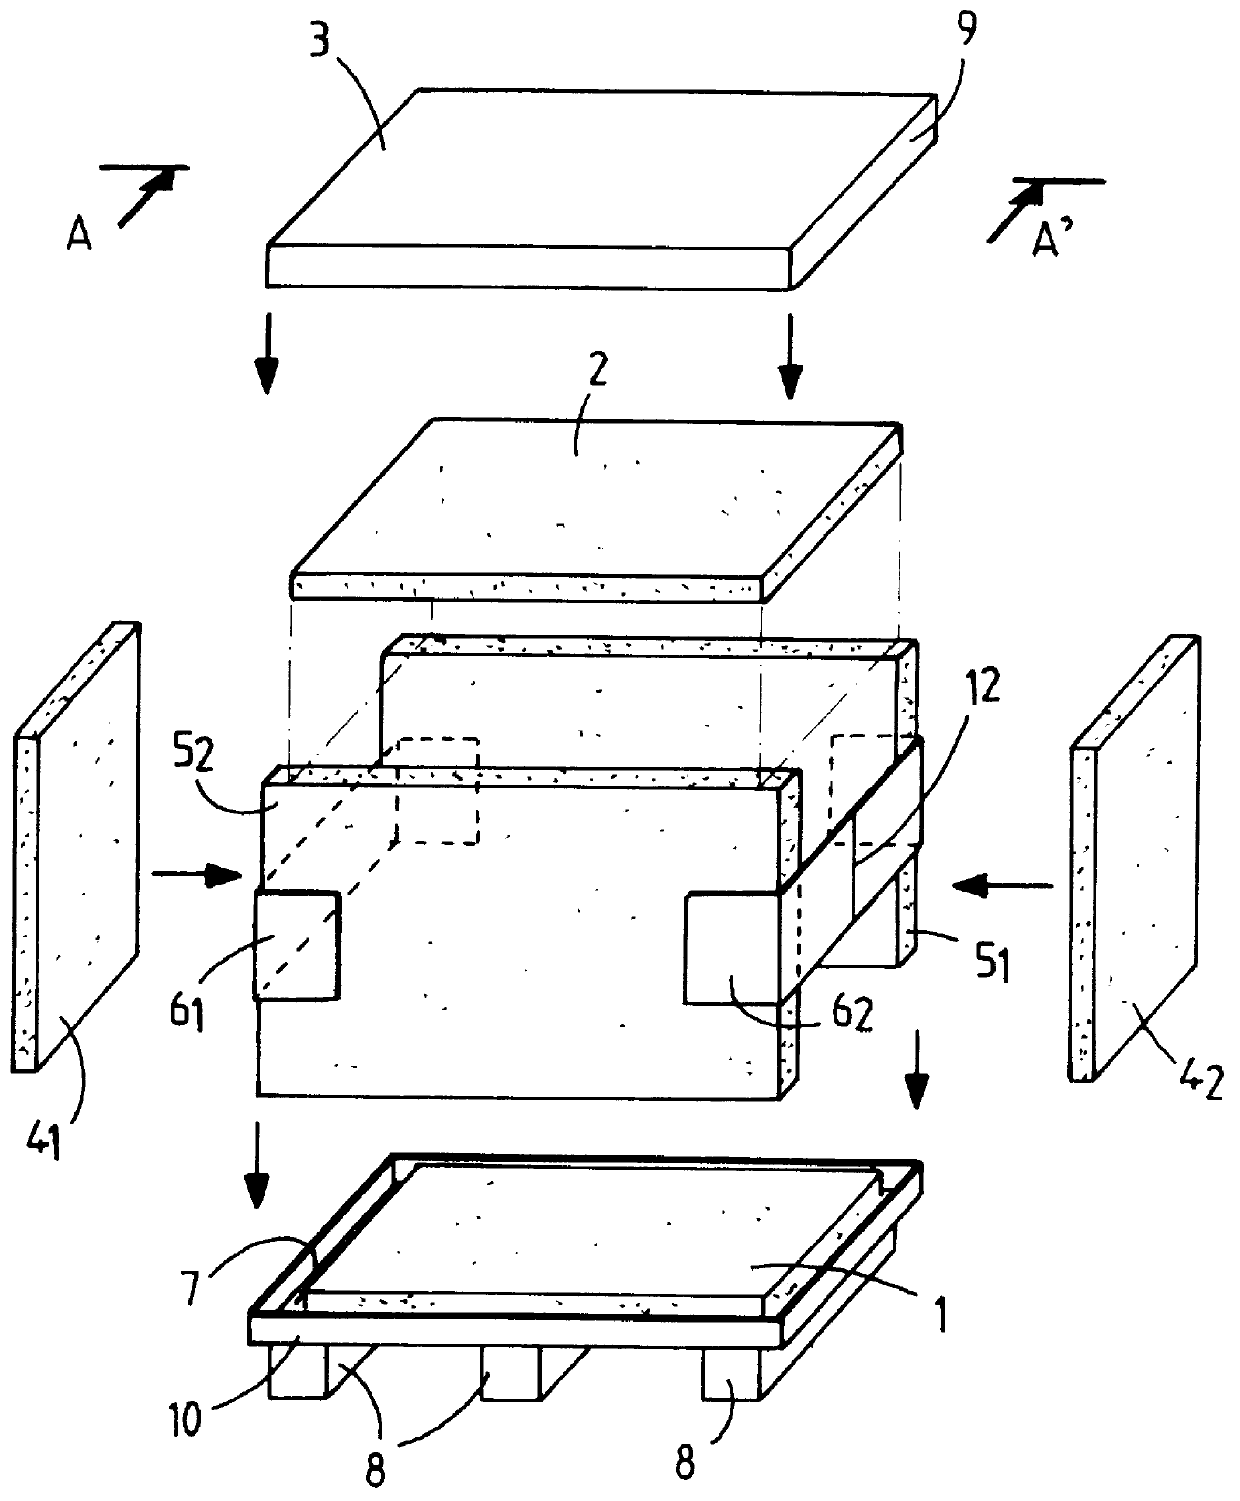 Insulating foldable box for transportation and packaging purposes